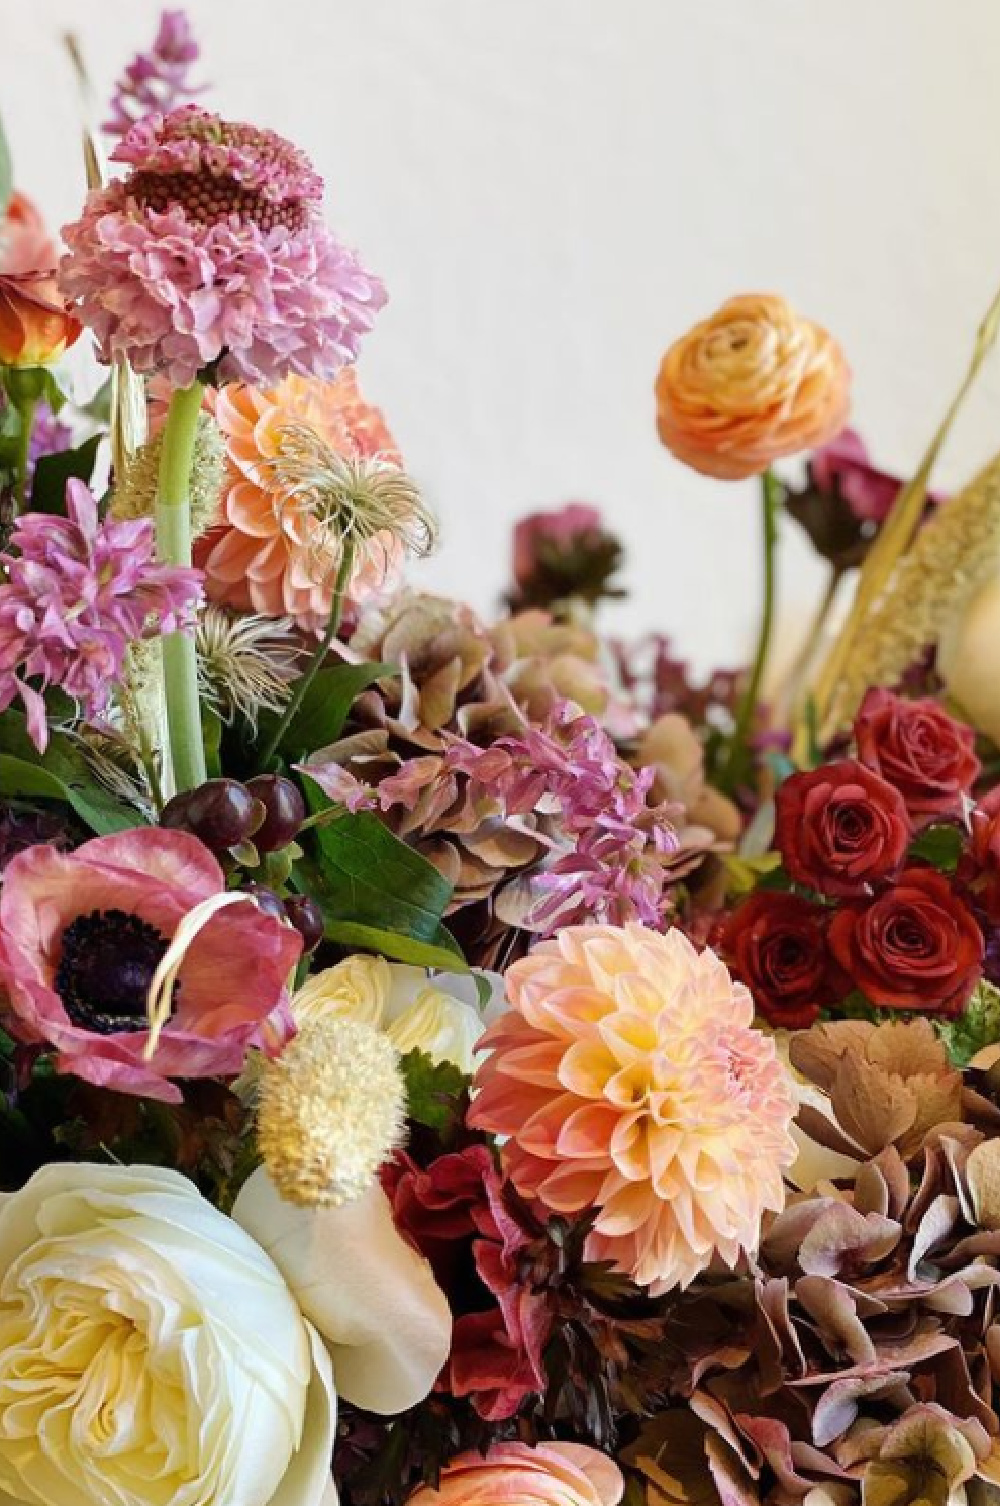 Colorful early fall flowers from The Flower Theory. #freshflowers